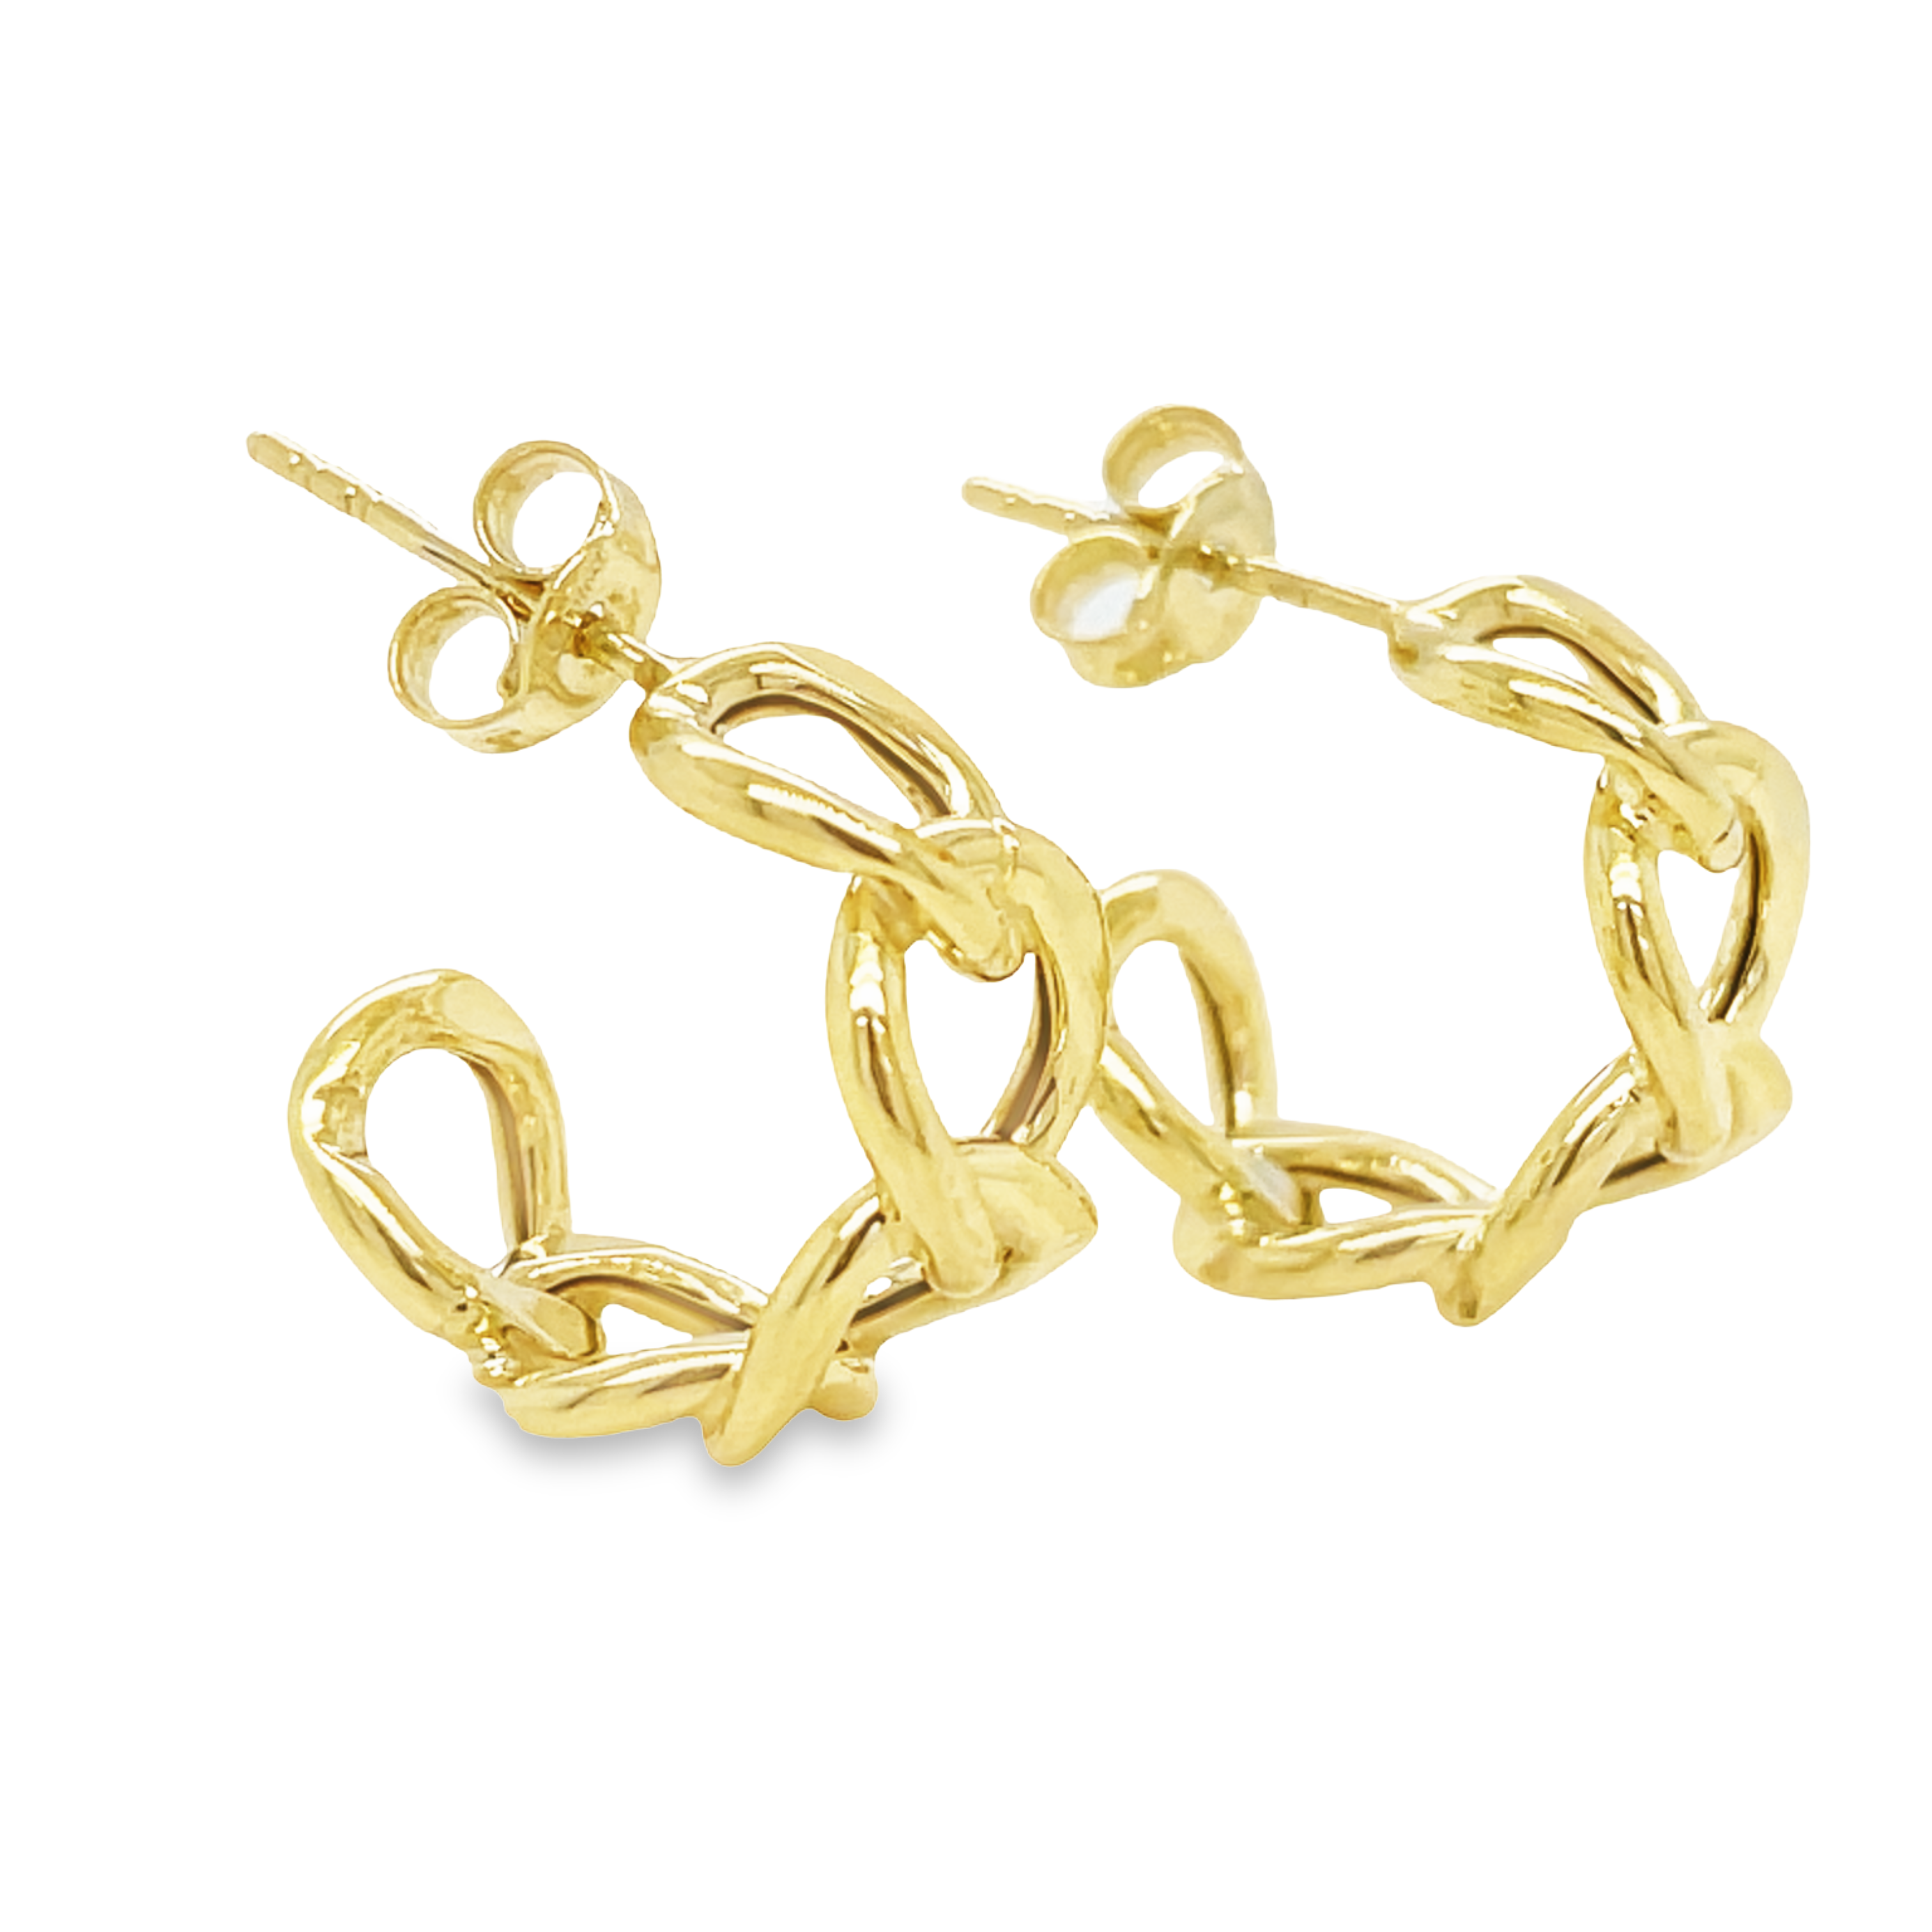 These classic 14k Italian Yellow Gold Open Link Hoop Earrings offer timeless sophistication in a lightweight design. These earrings are 16.00 mm in size and feature friction backs for a secure fit to your ear. Crafted with authentic Italian gold, they'll make a stylish addition to your jewelry collection.